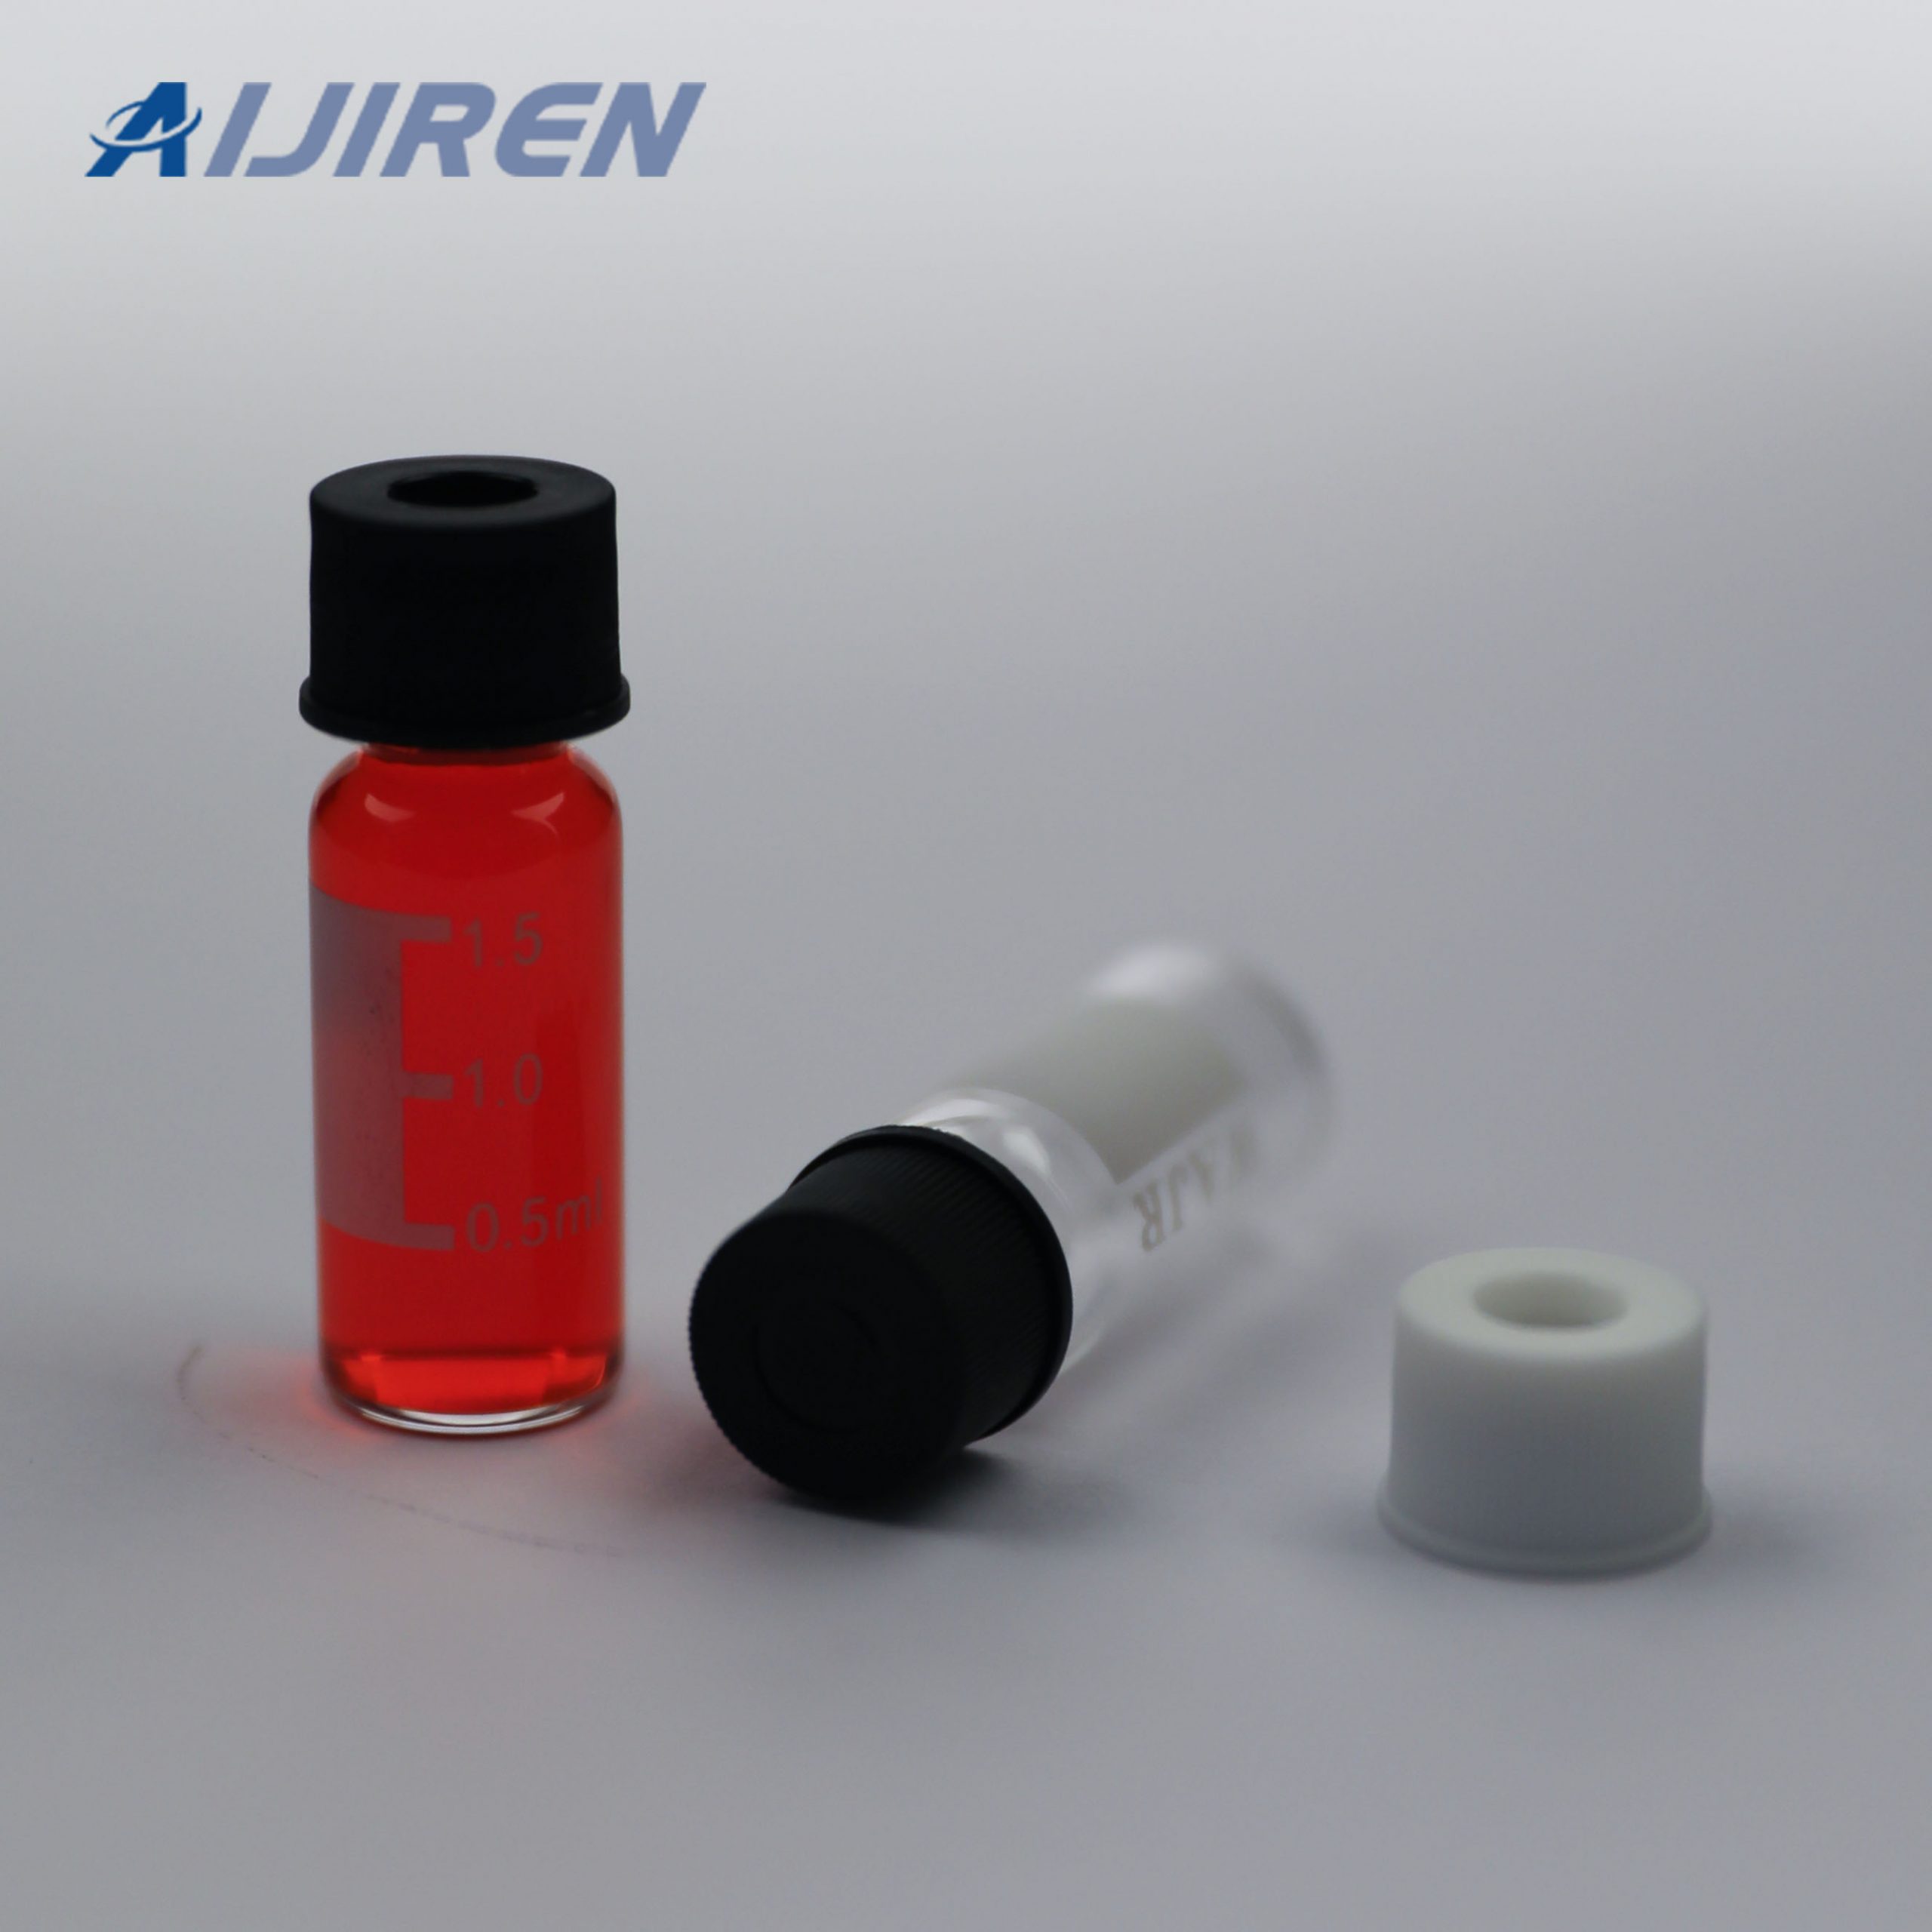 20ml headspace vial2ml 8mm Glass Vial with Label Area from Aijiren